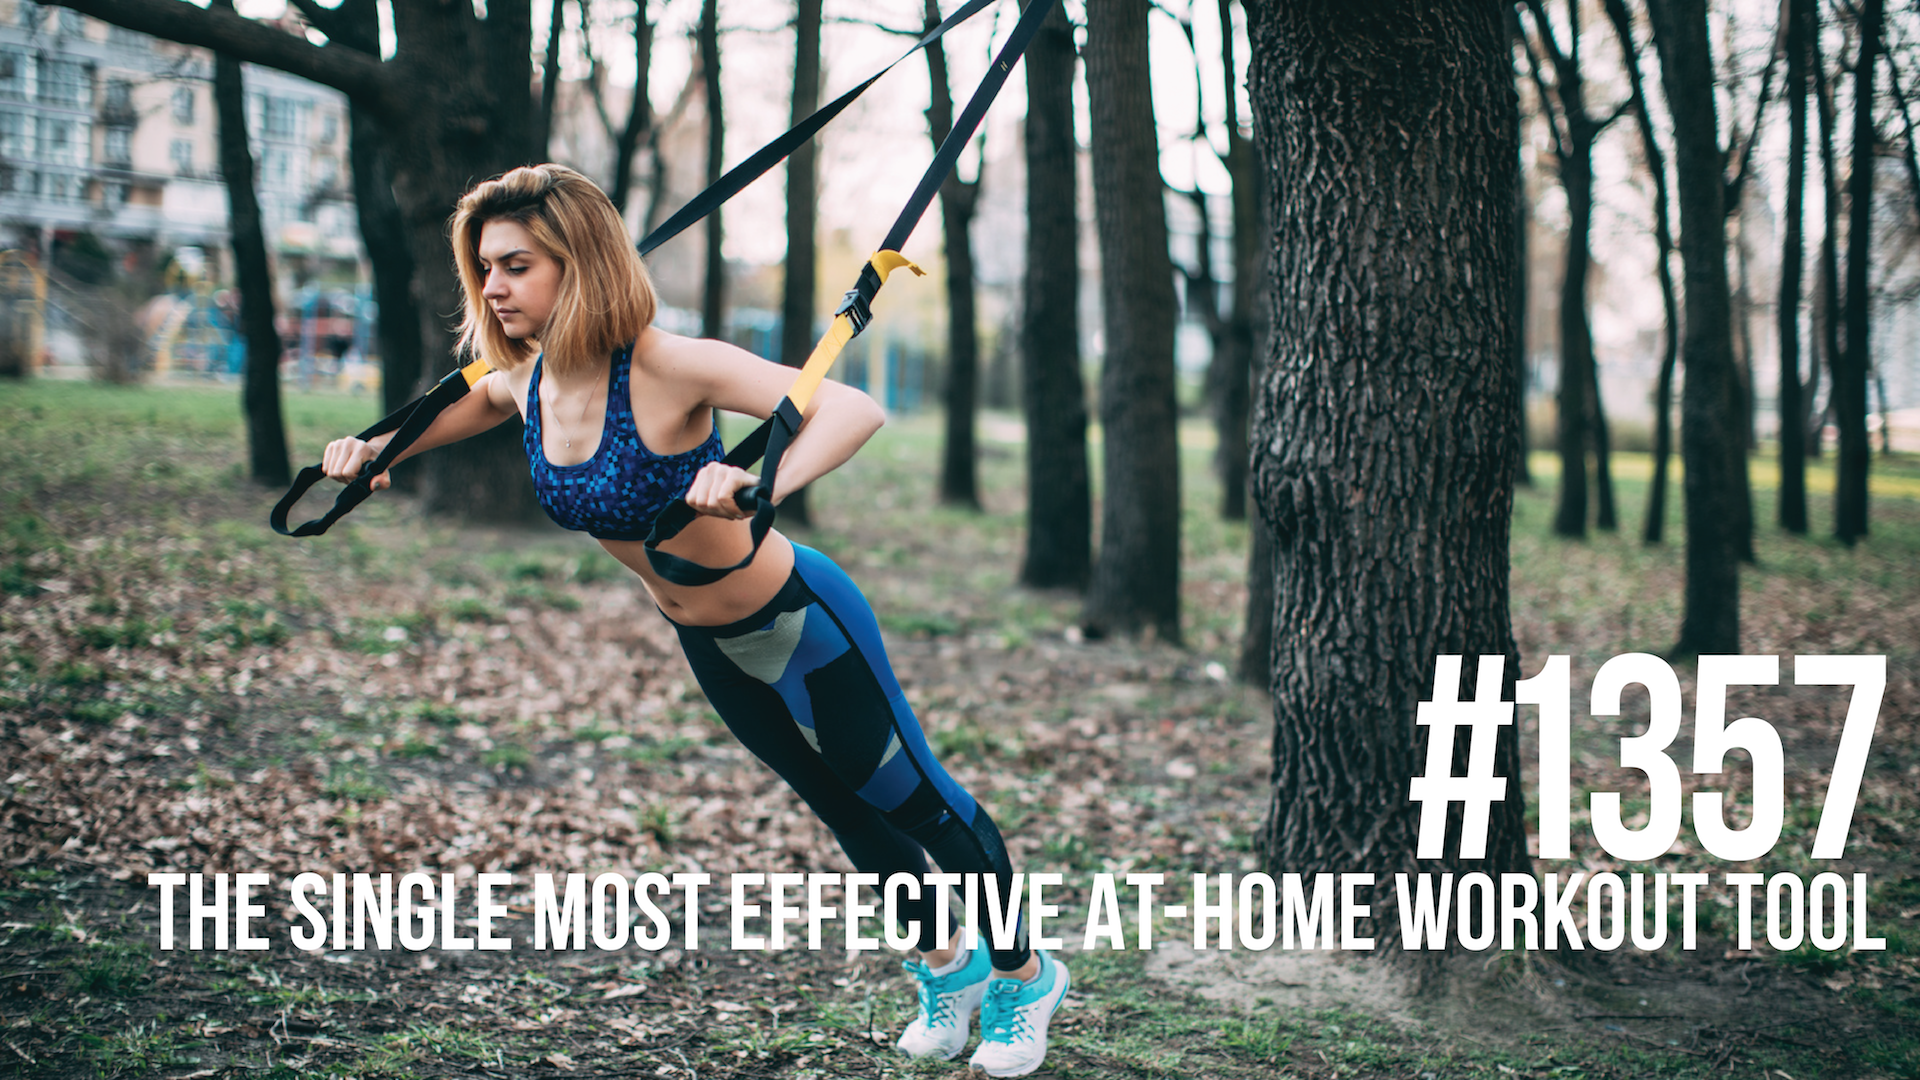 1357: The Single Most Effective At-Home Workout Tool